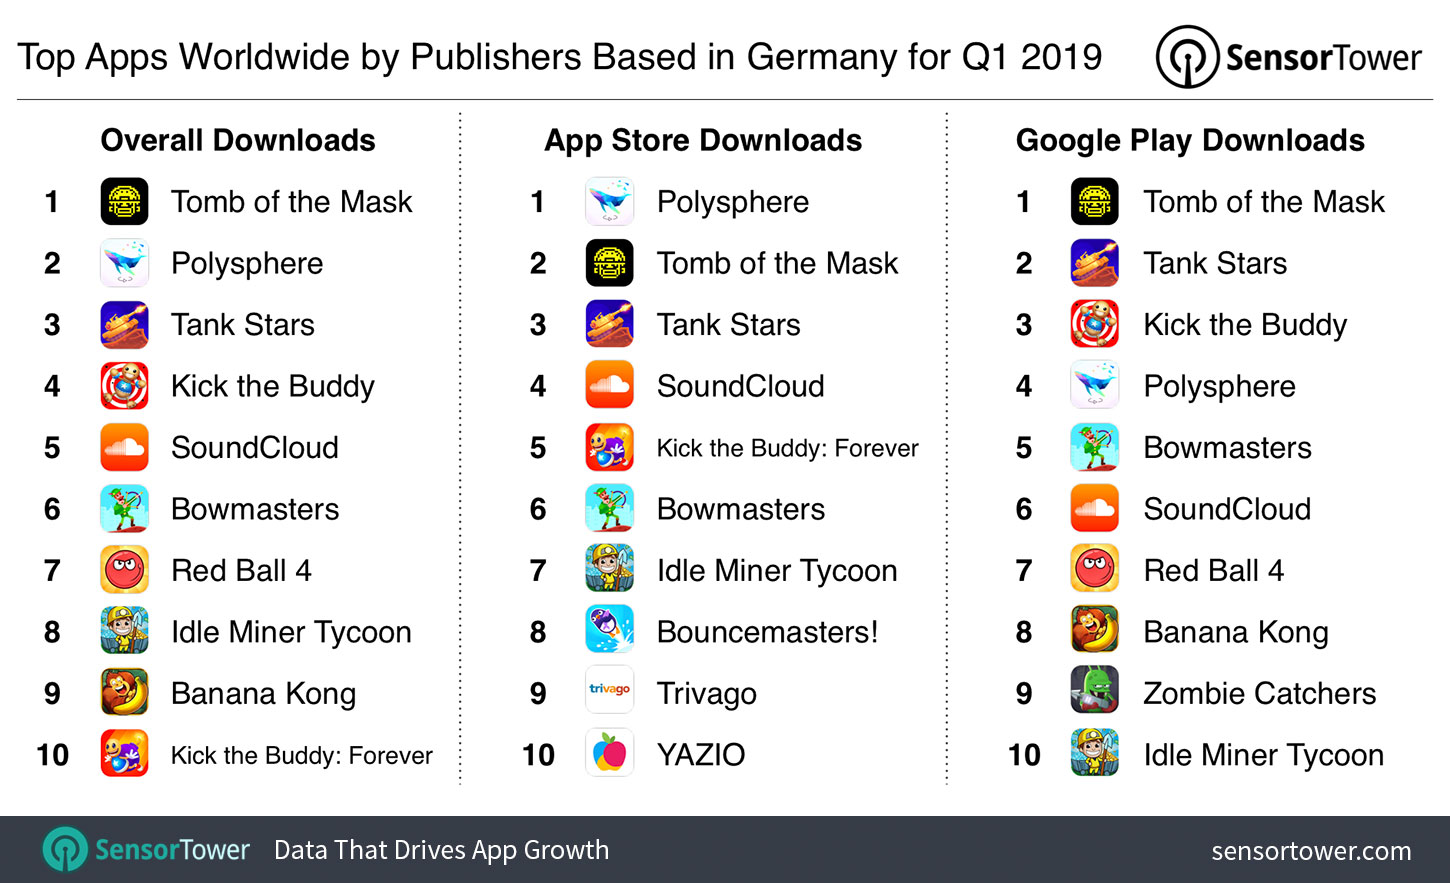 Top Apps Worldwide by Publishers based in Germany for Q1 2019